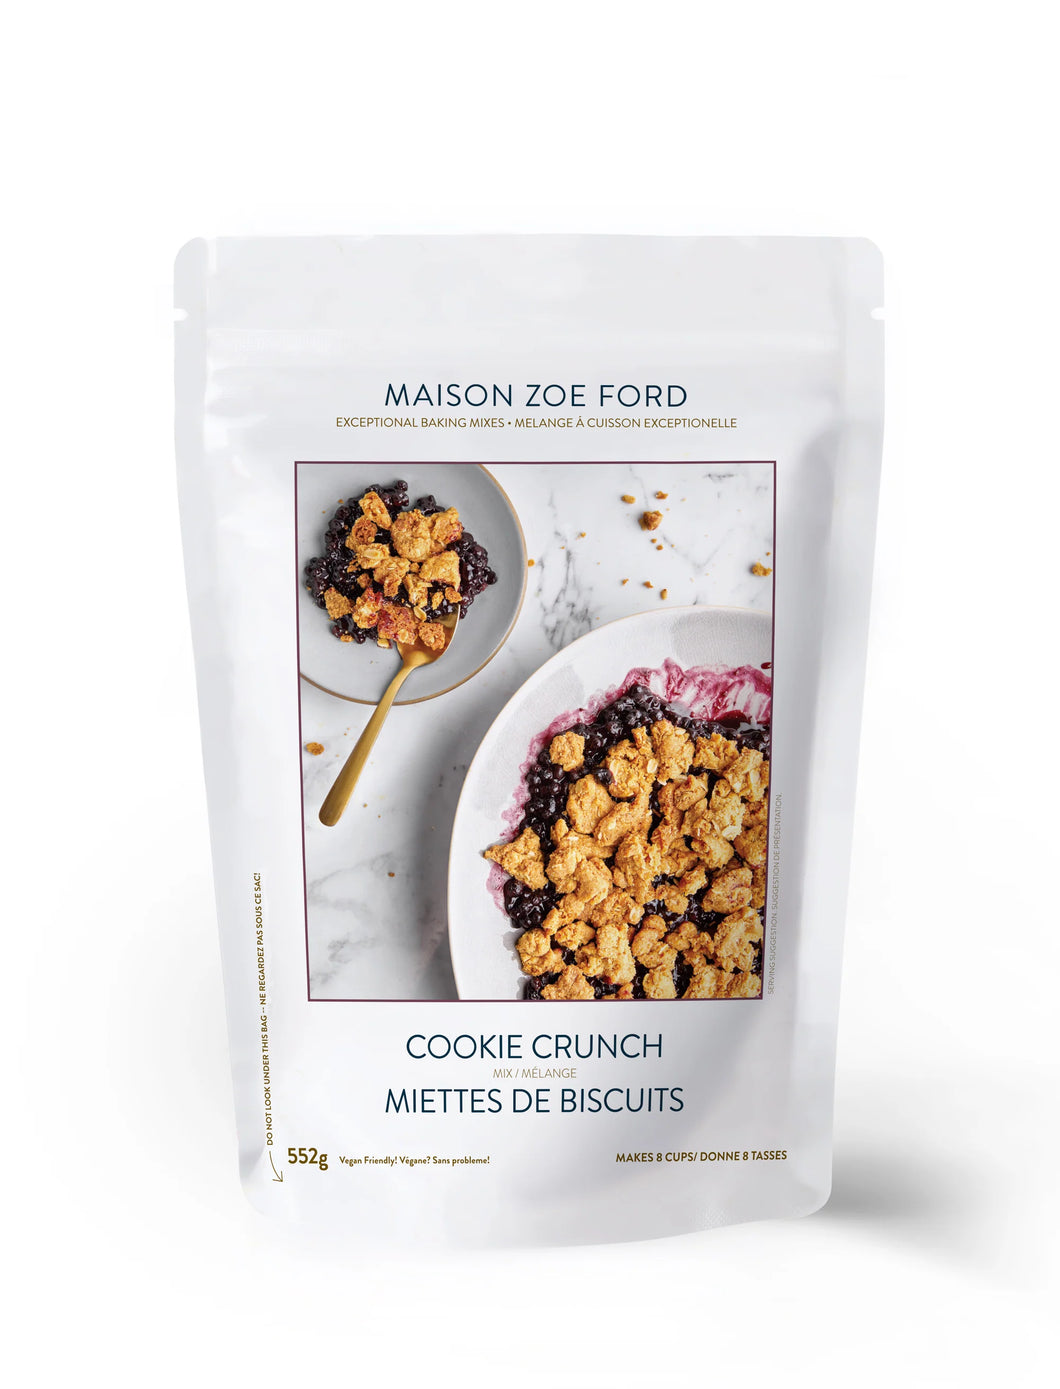 Maison Zoe Ford Cookie Crunch